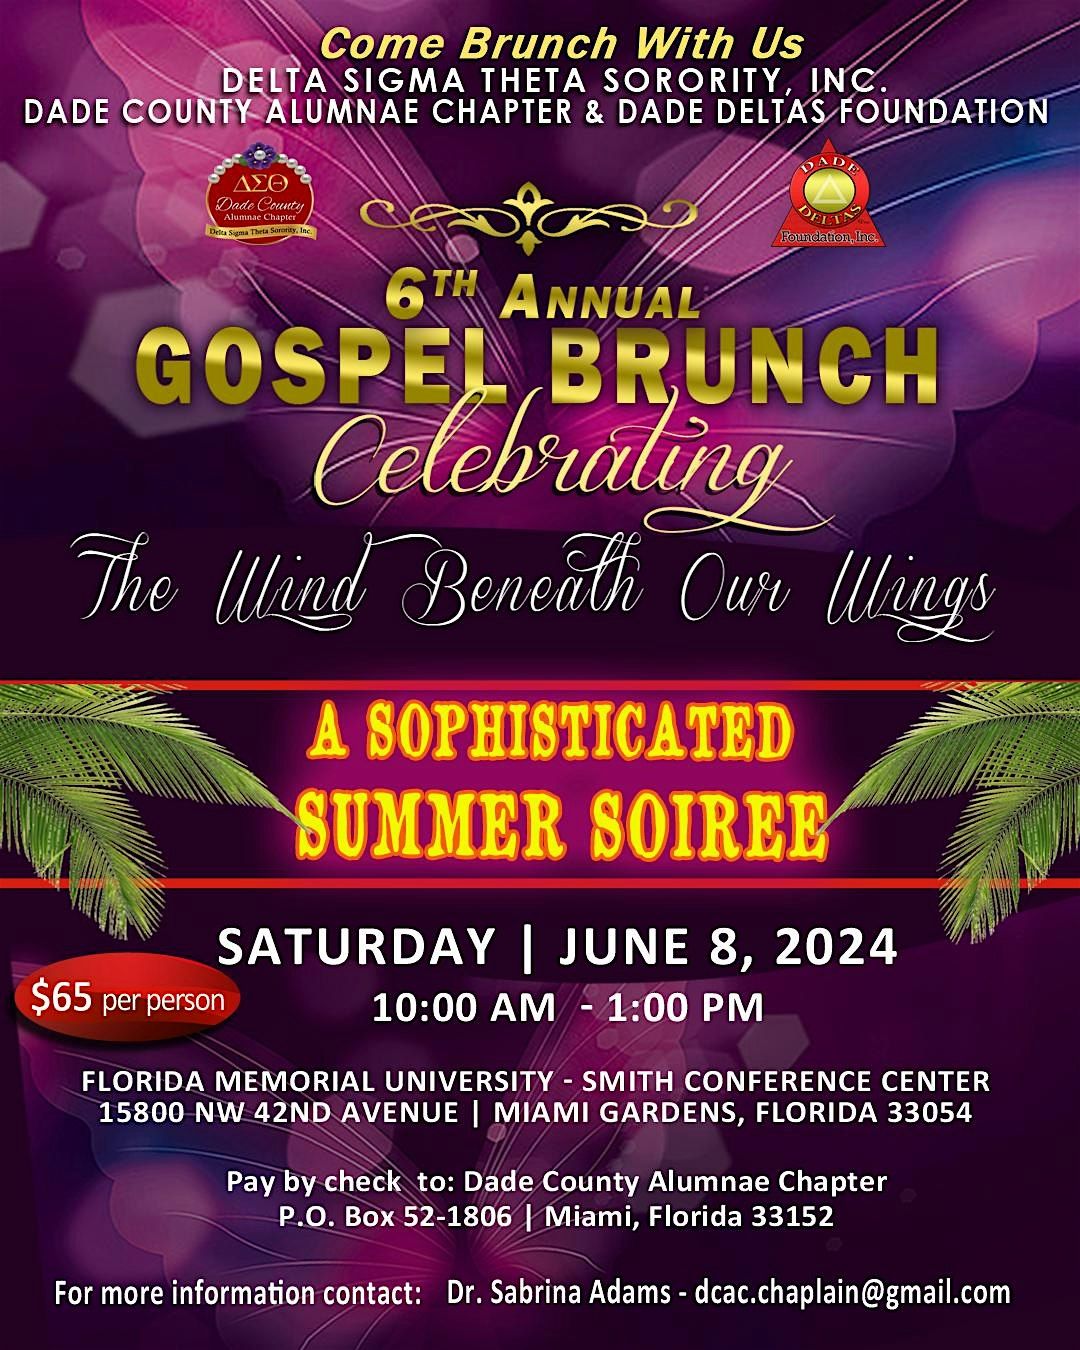 6th Annual Gospel Brunch: Celebrating the Wind Beneath Our Wings